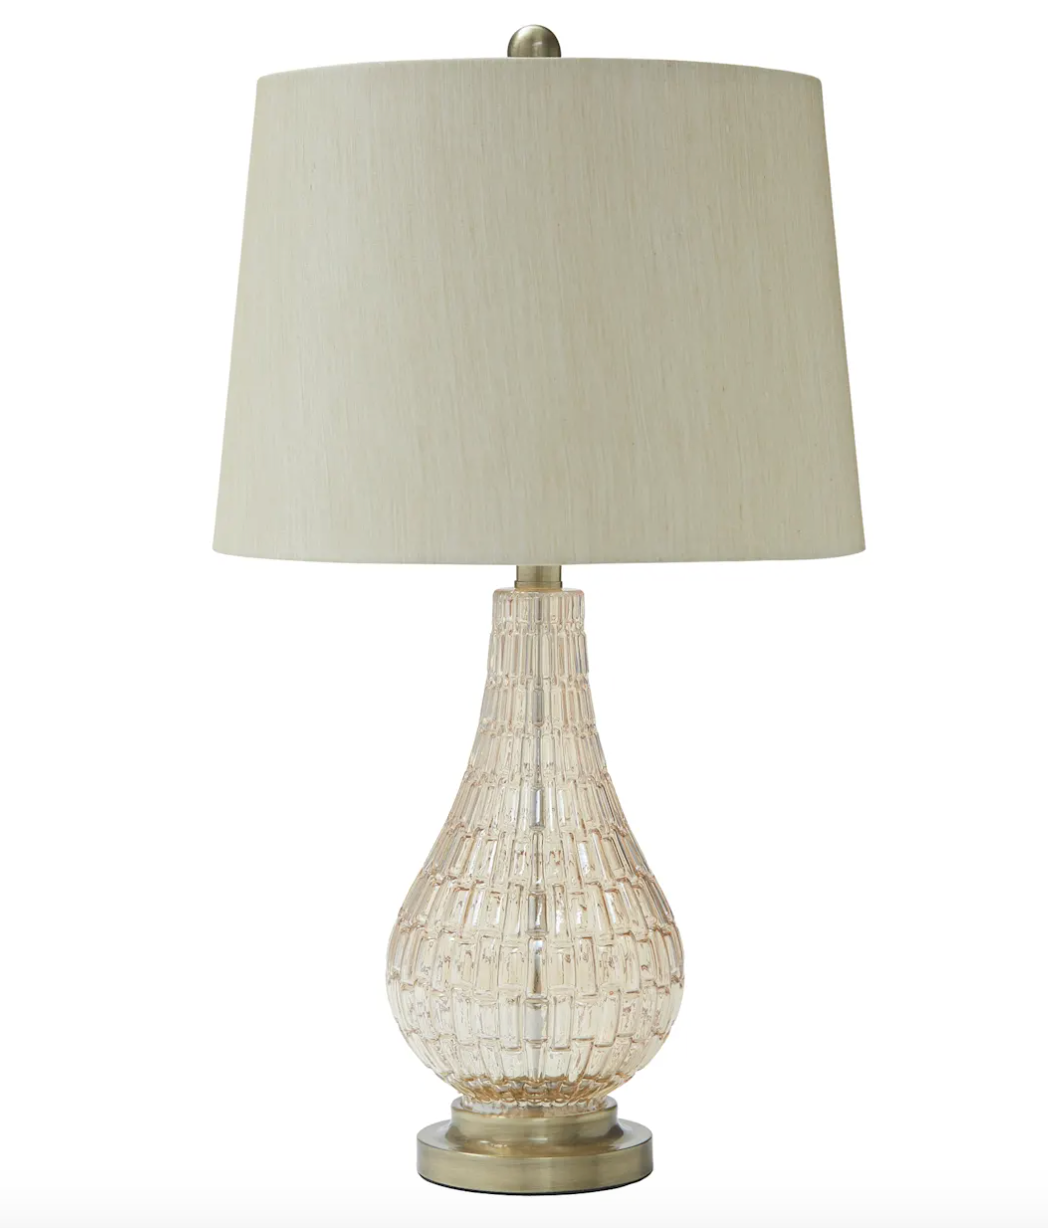 Champagne Glass Table Lamp.